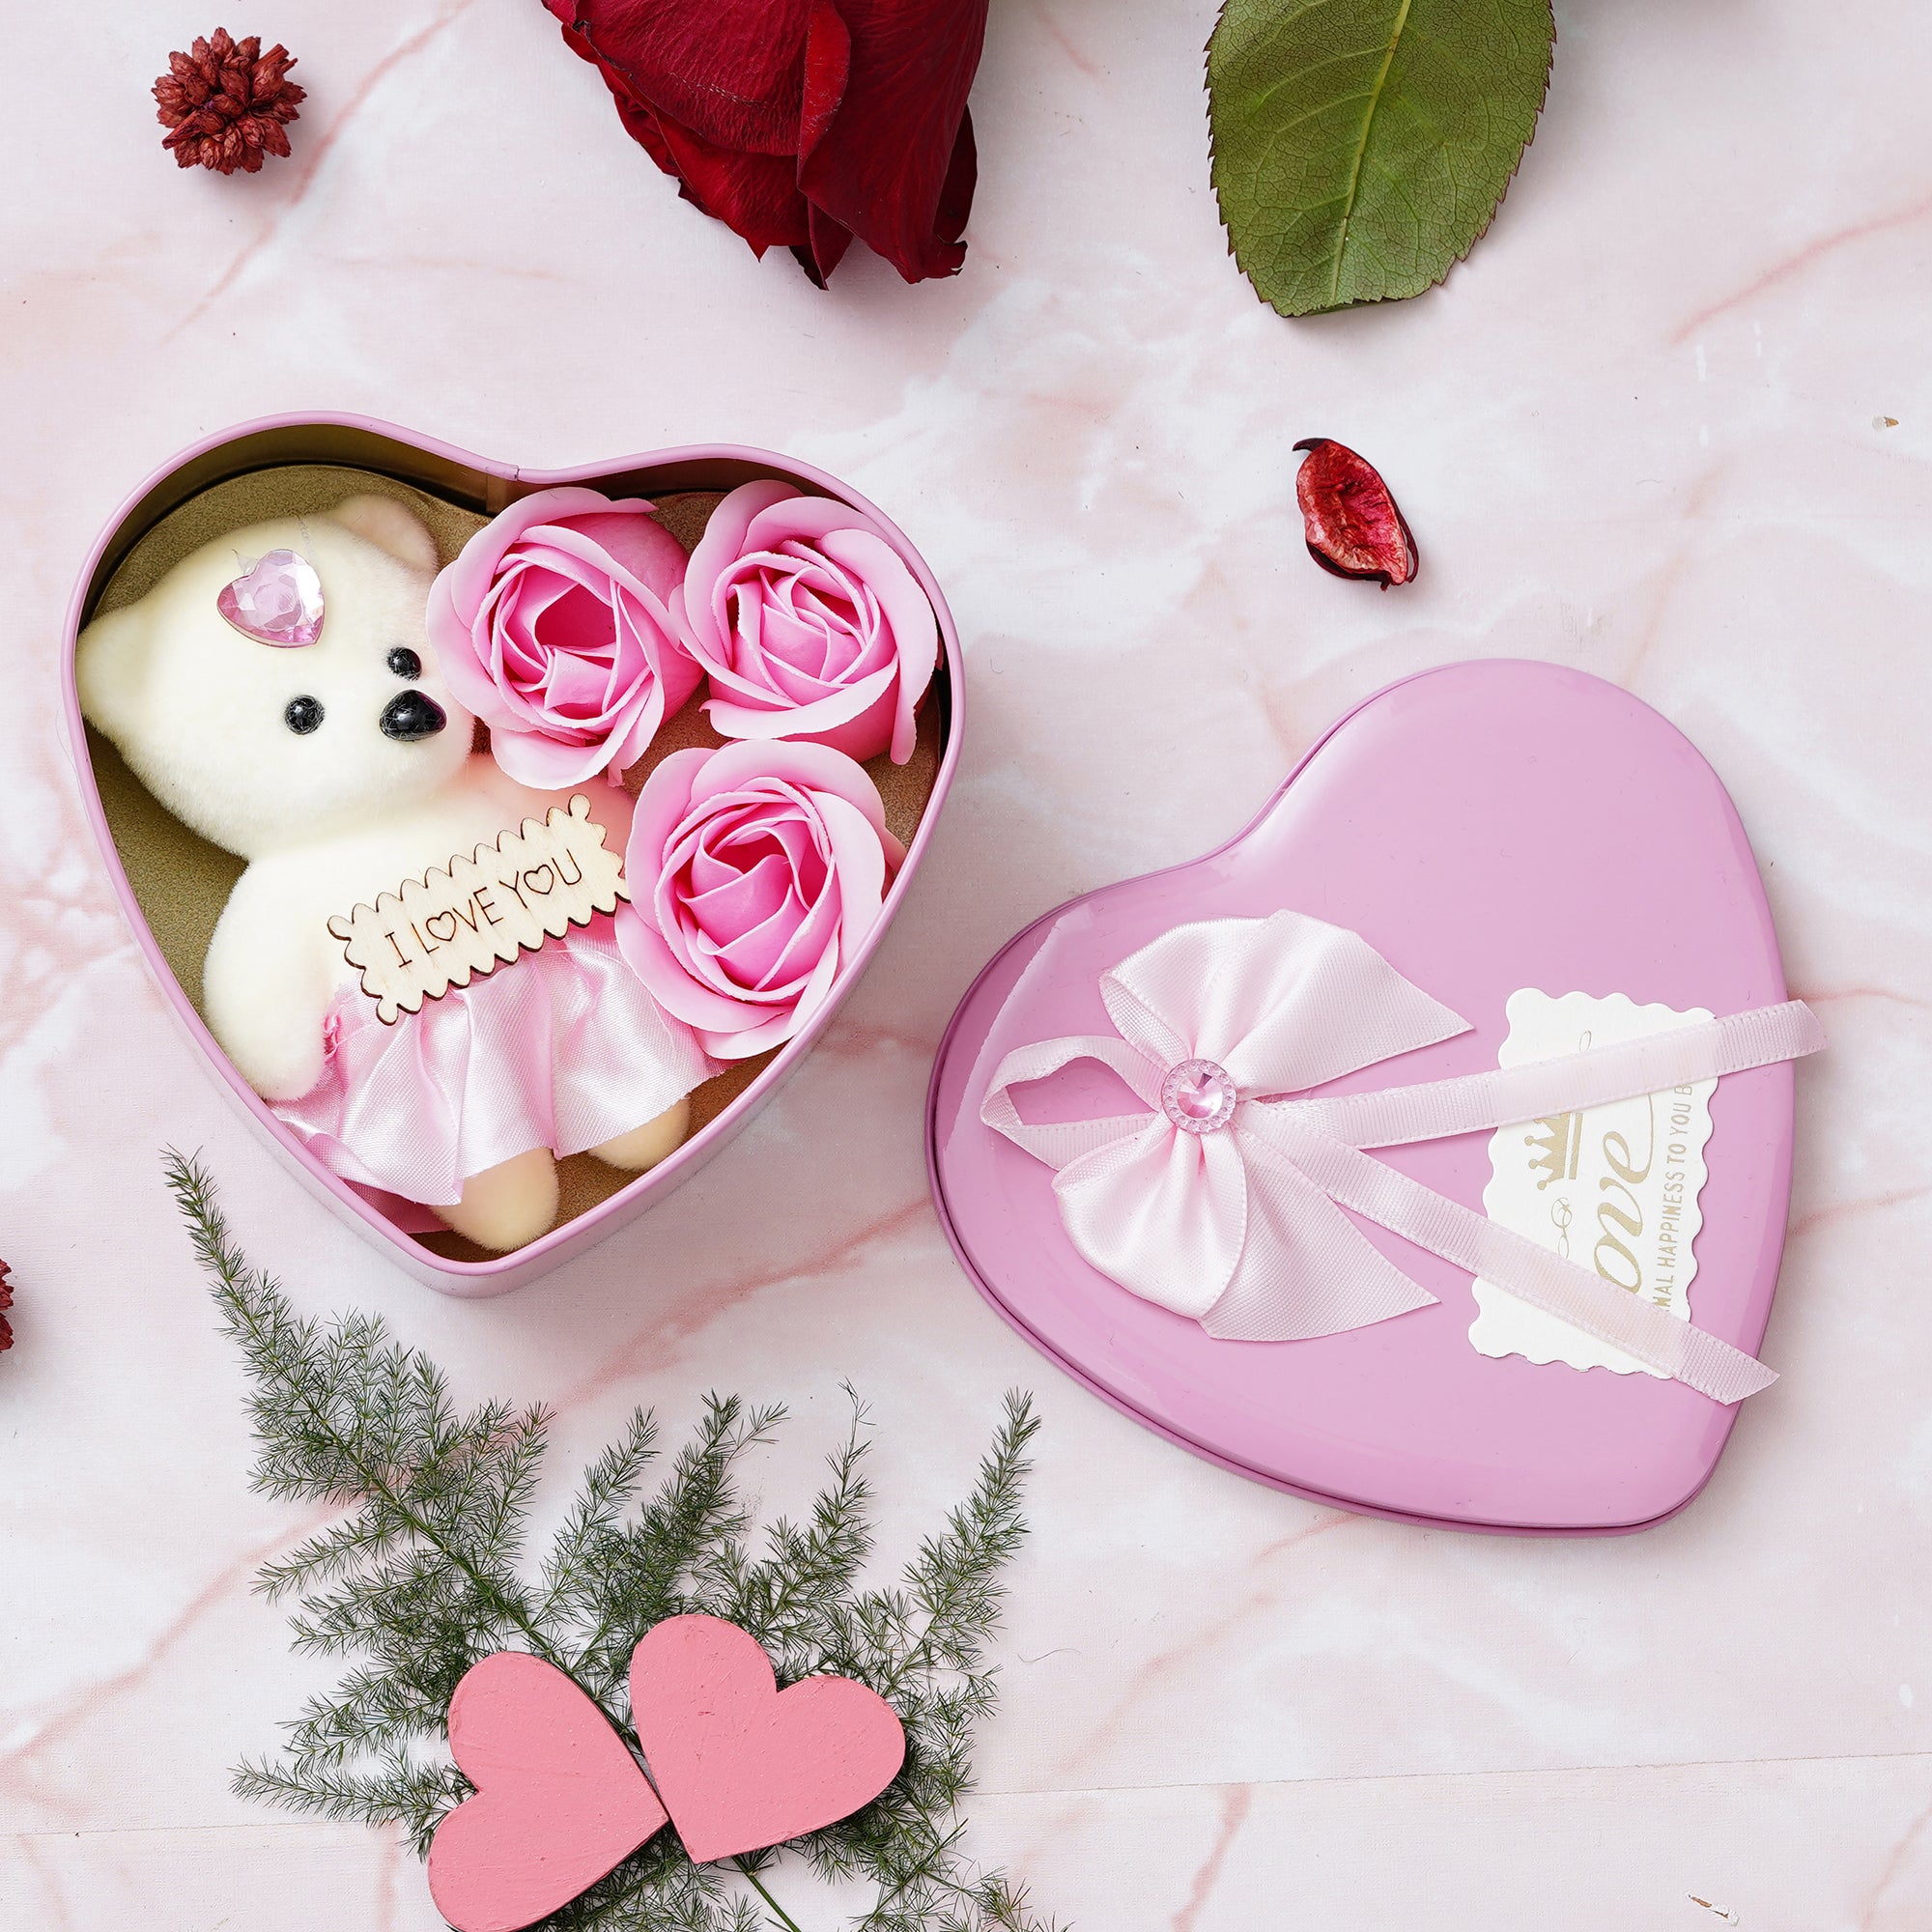 Valentine Combo of Pack of 12 Love Coupons Gift Cards Set, Love Golden Rose Table Decor Gift Set Showpiece, Pink Heart Shaped Gift Box with Teddy and Roses 5